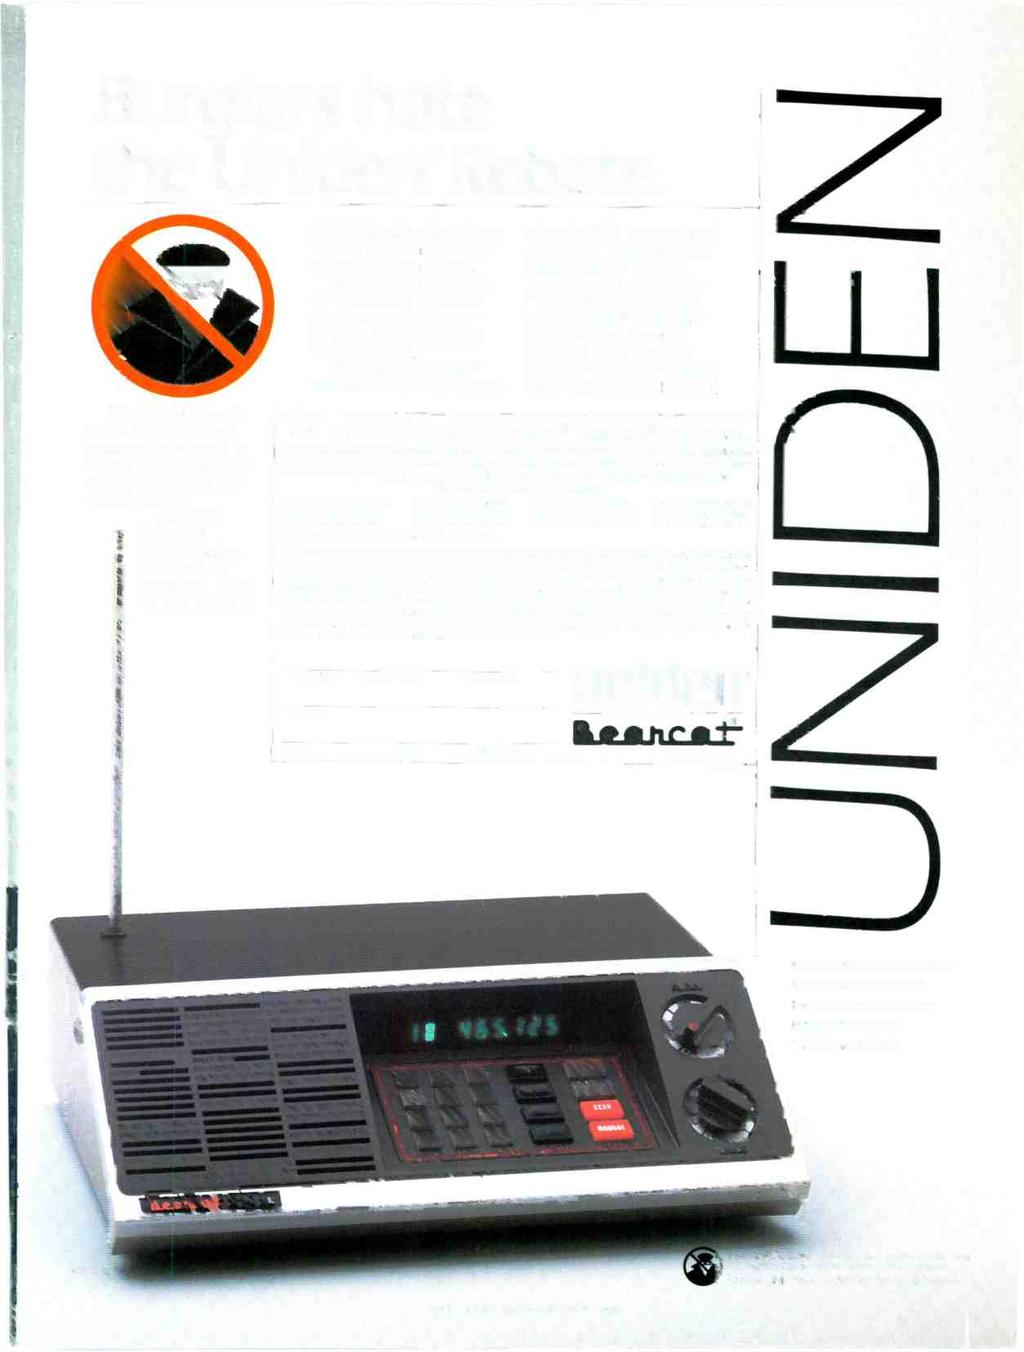 Burglars hate the Uniden Rebate. A burglar can only work when he's an unexpected guest. A home that's prepared and protected is his worst enemy. Uniden Bearcat scanners can help you be prepared.